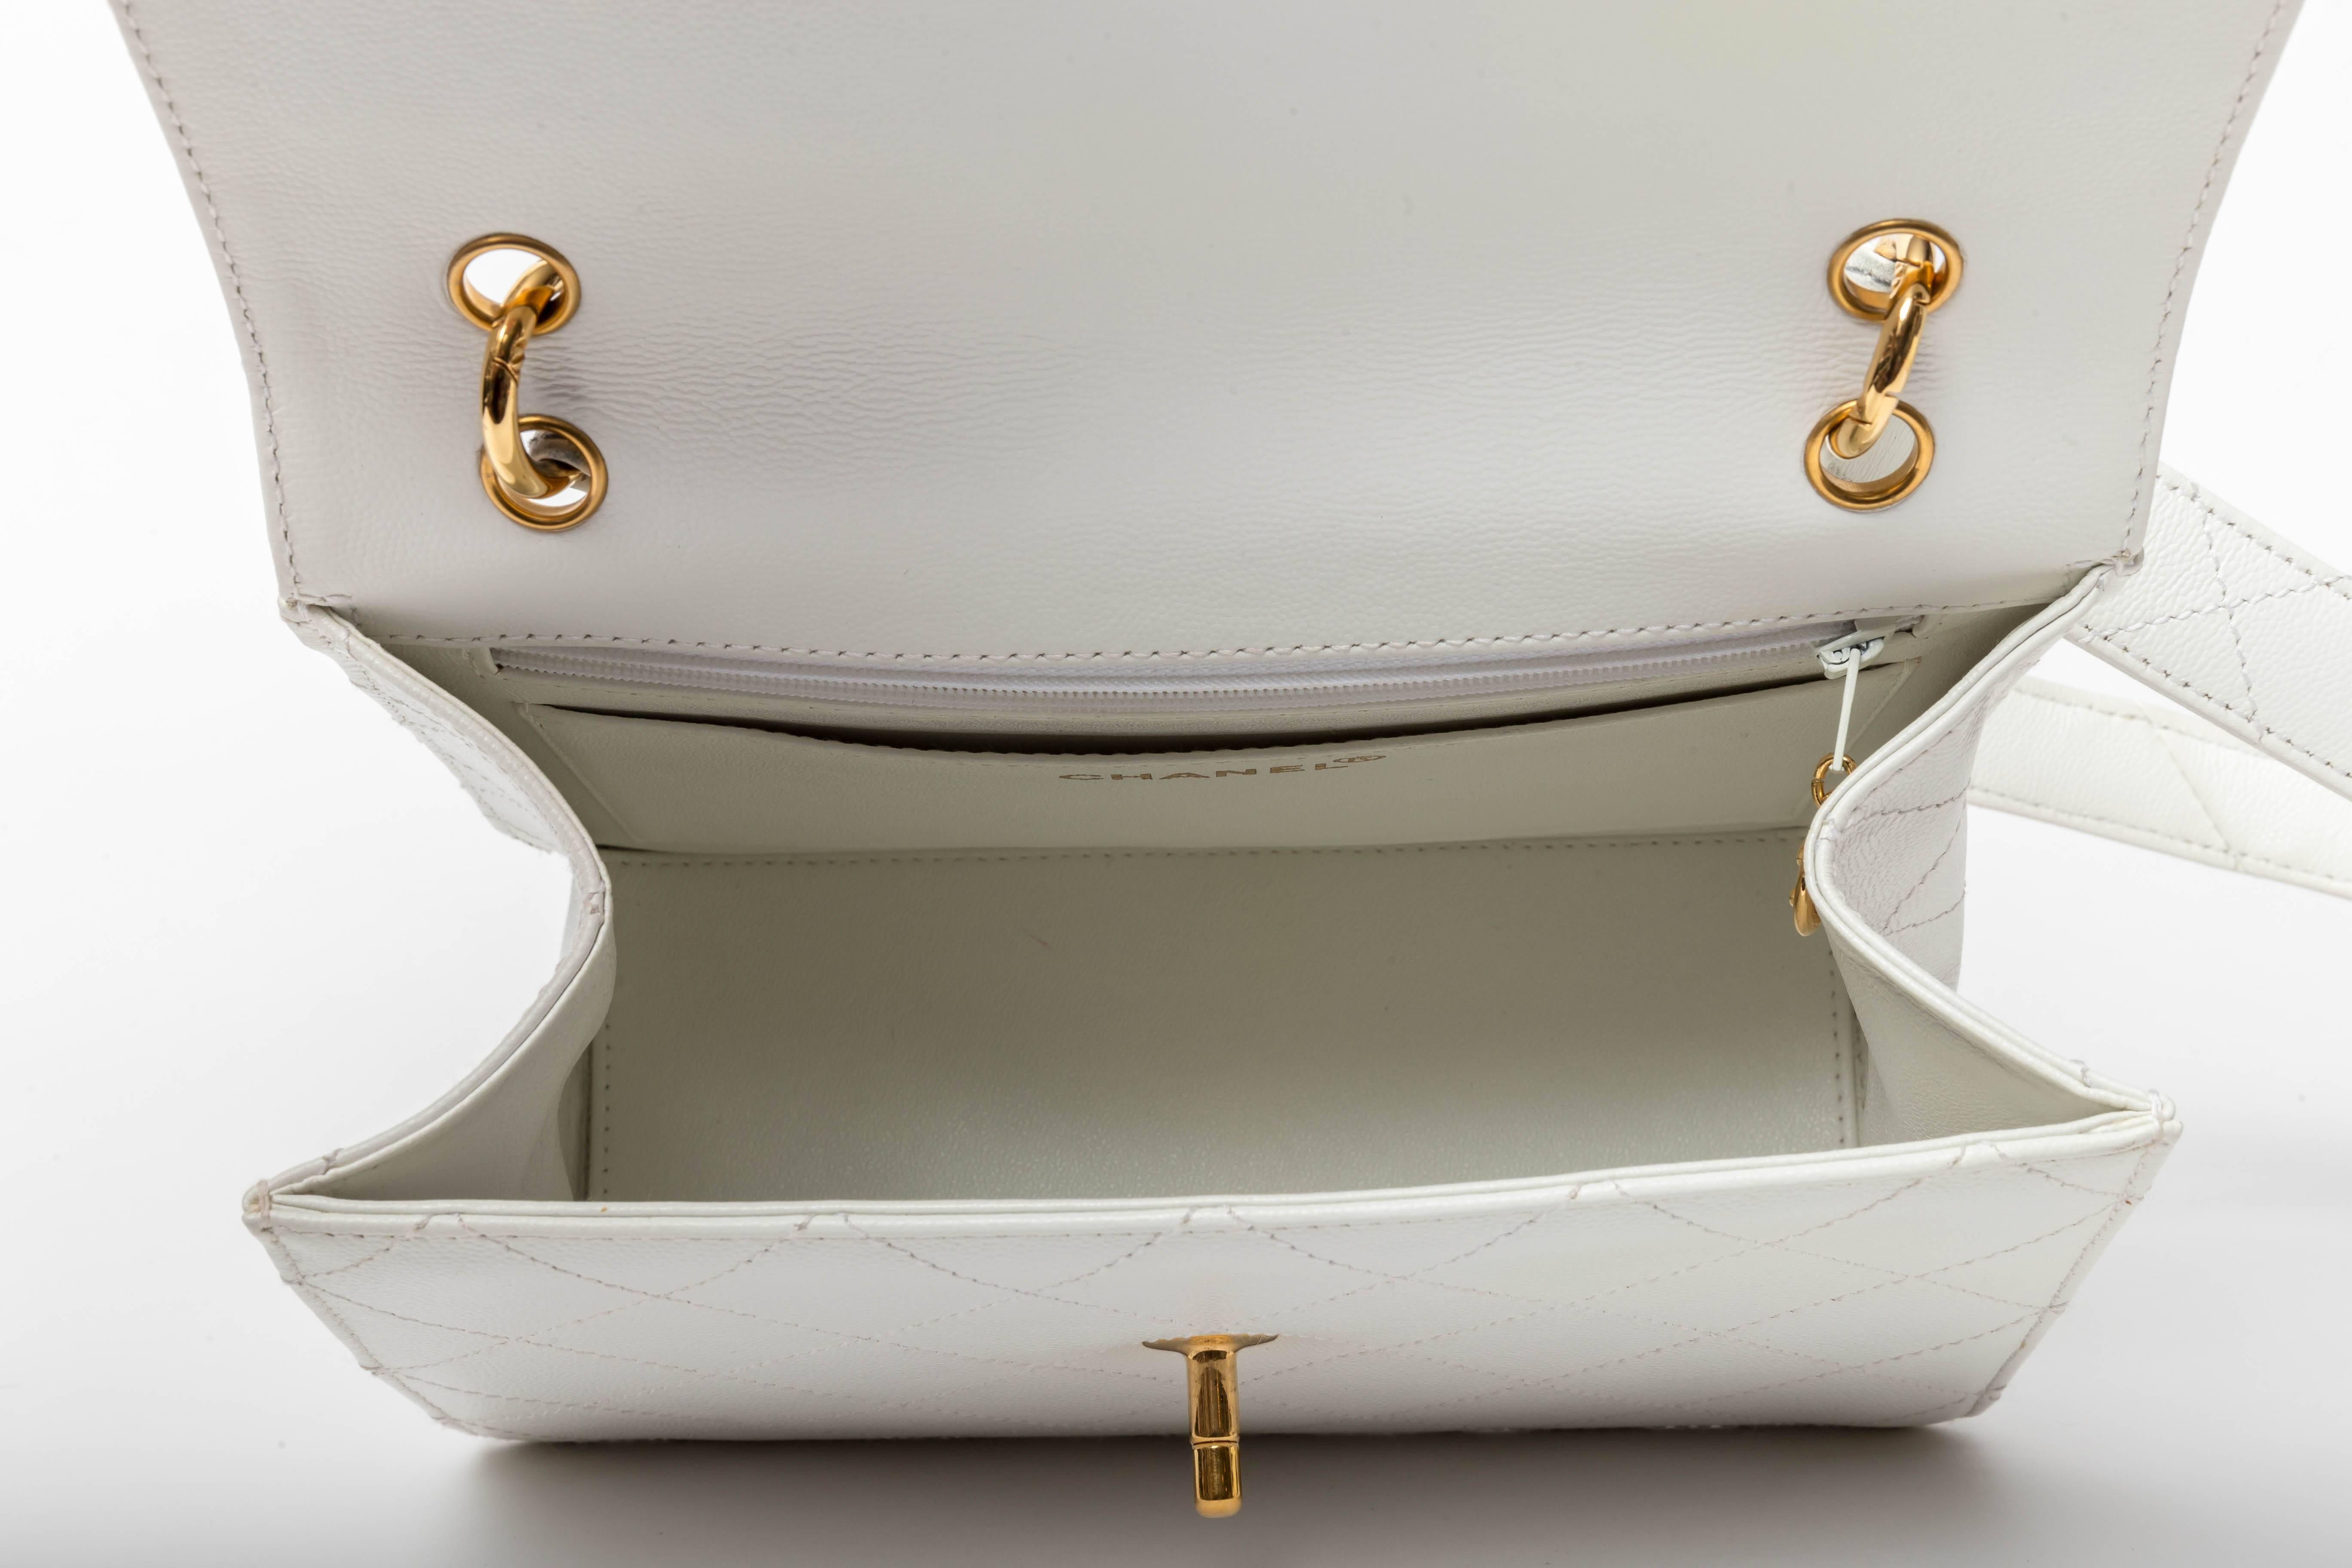 Chanel Shoulder Bag in White Caviar with Gold Hardware 2